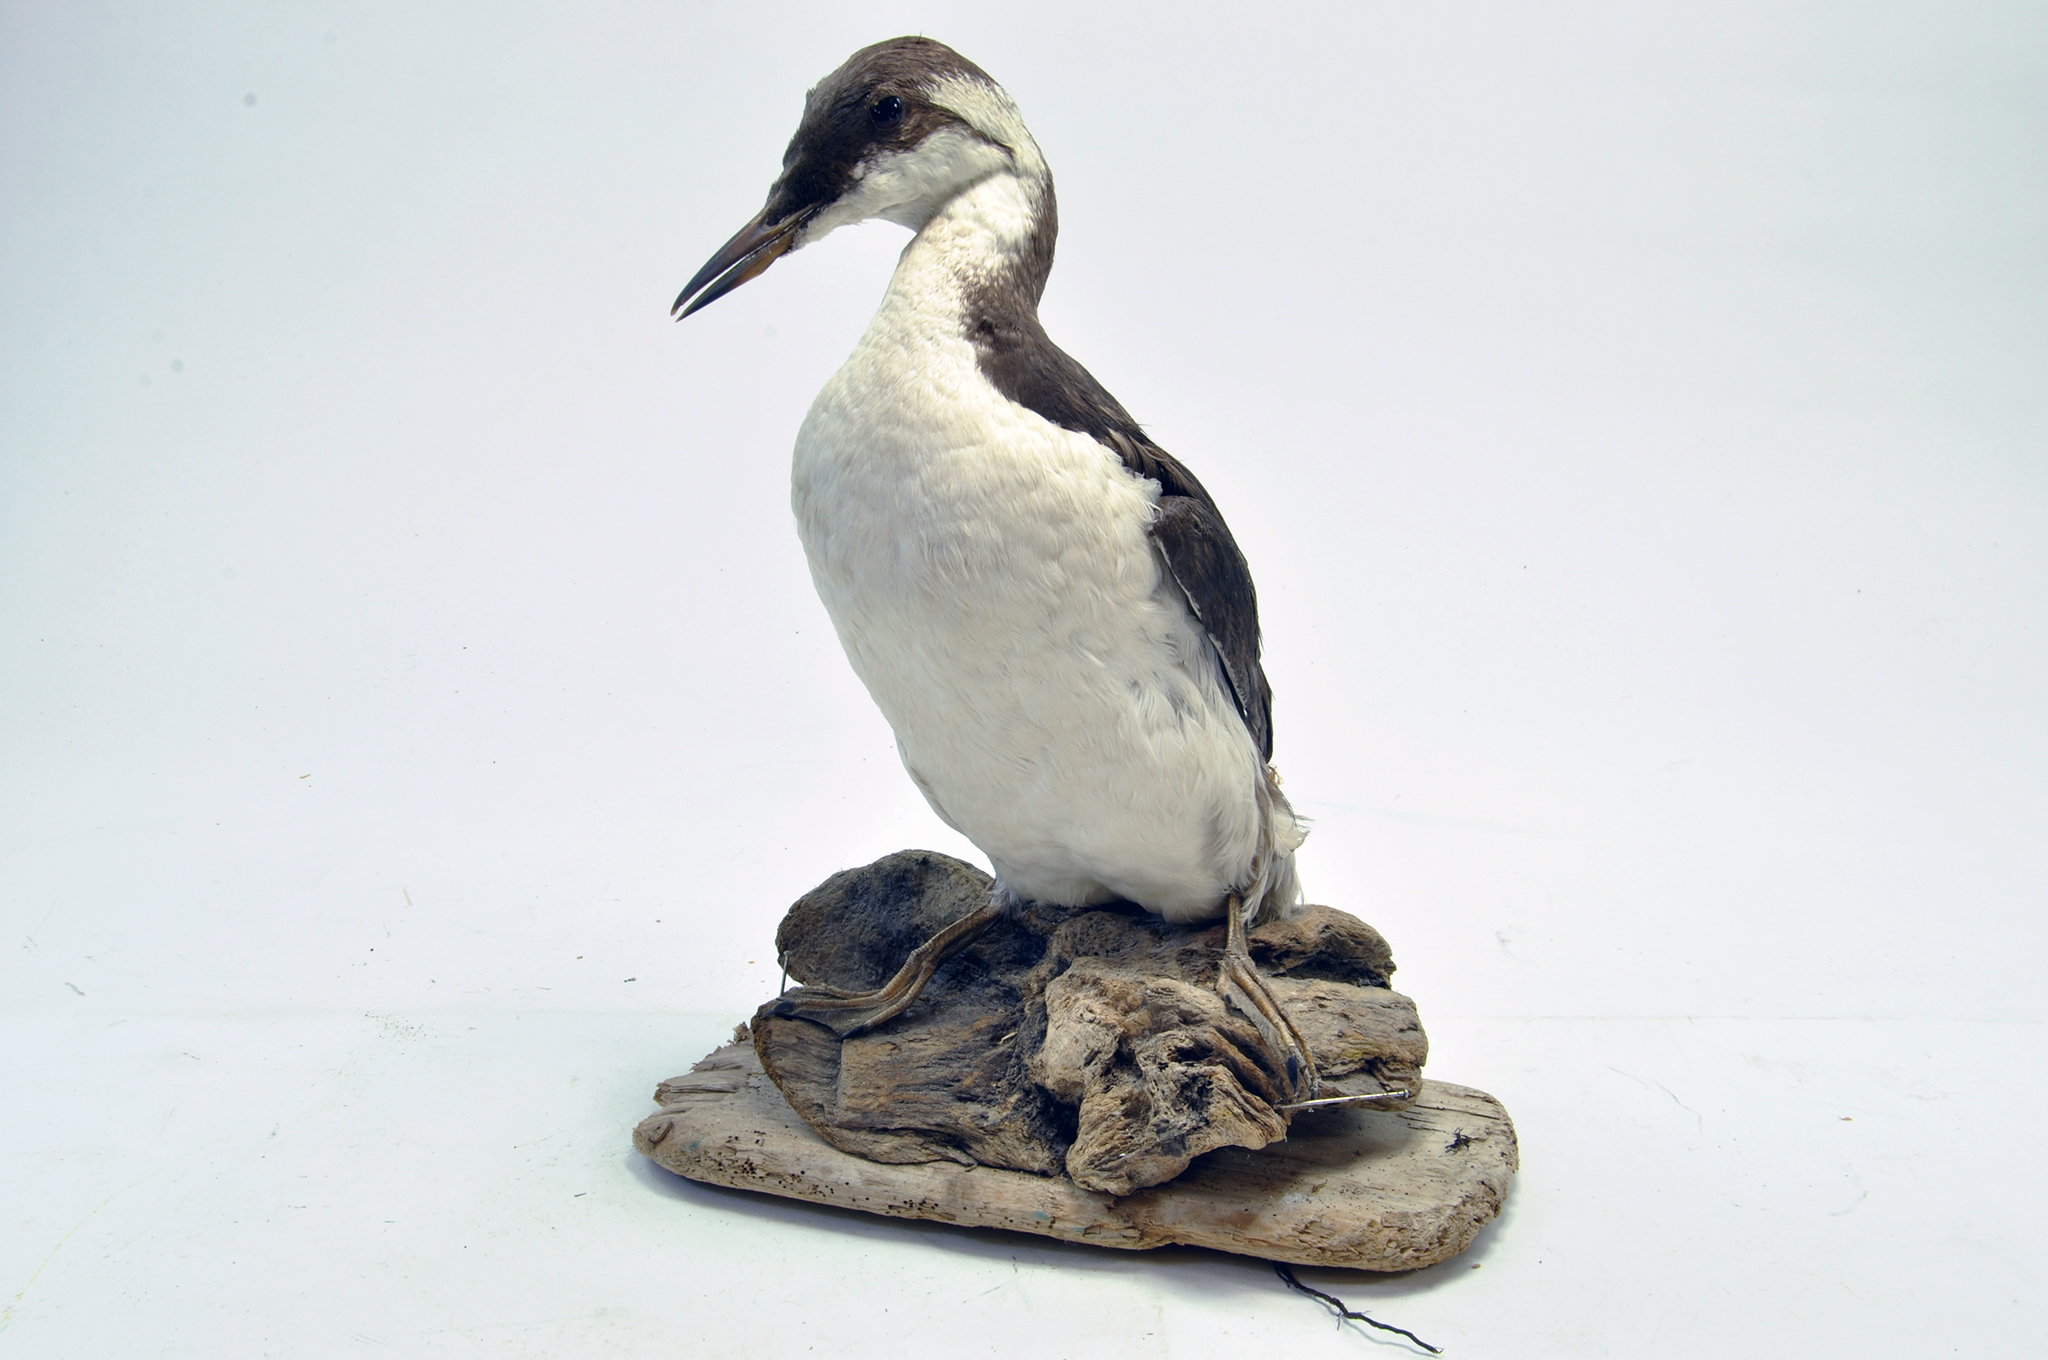 Taxidermy: An early 21st century example of a Guillemot (Uria aalge) mounted on a scenic rock